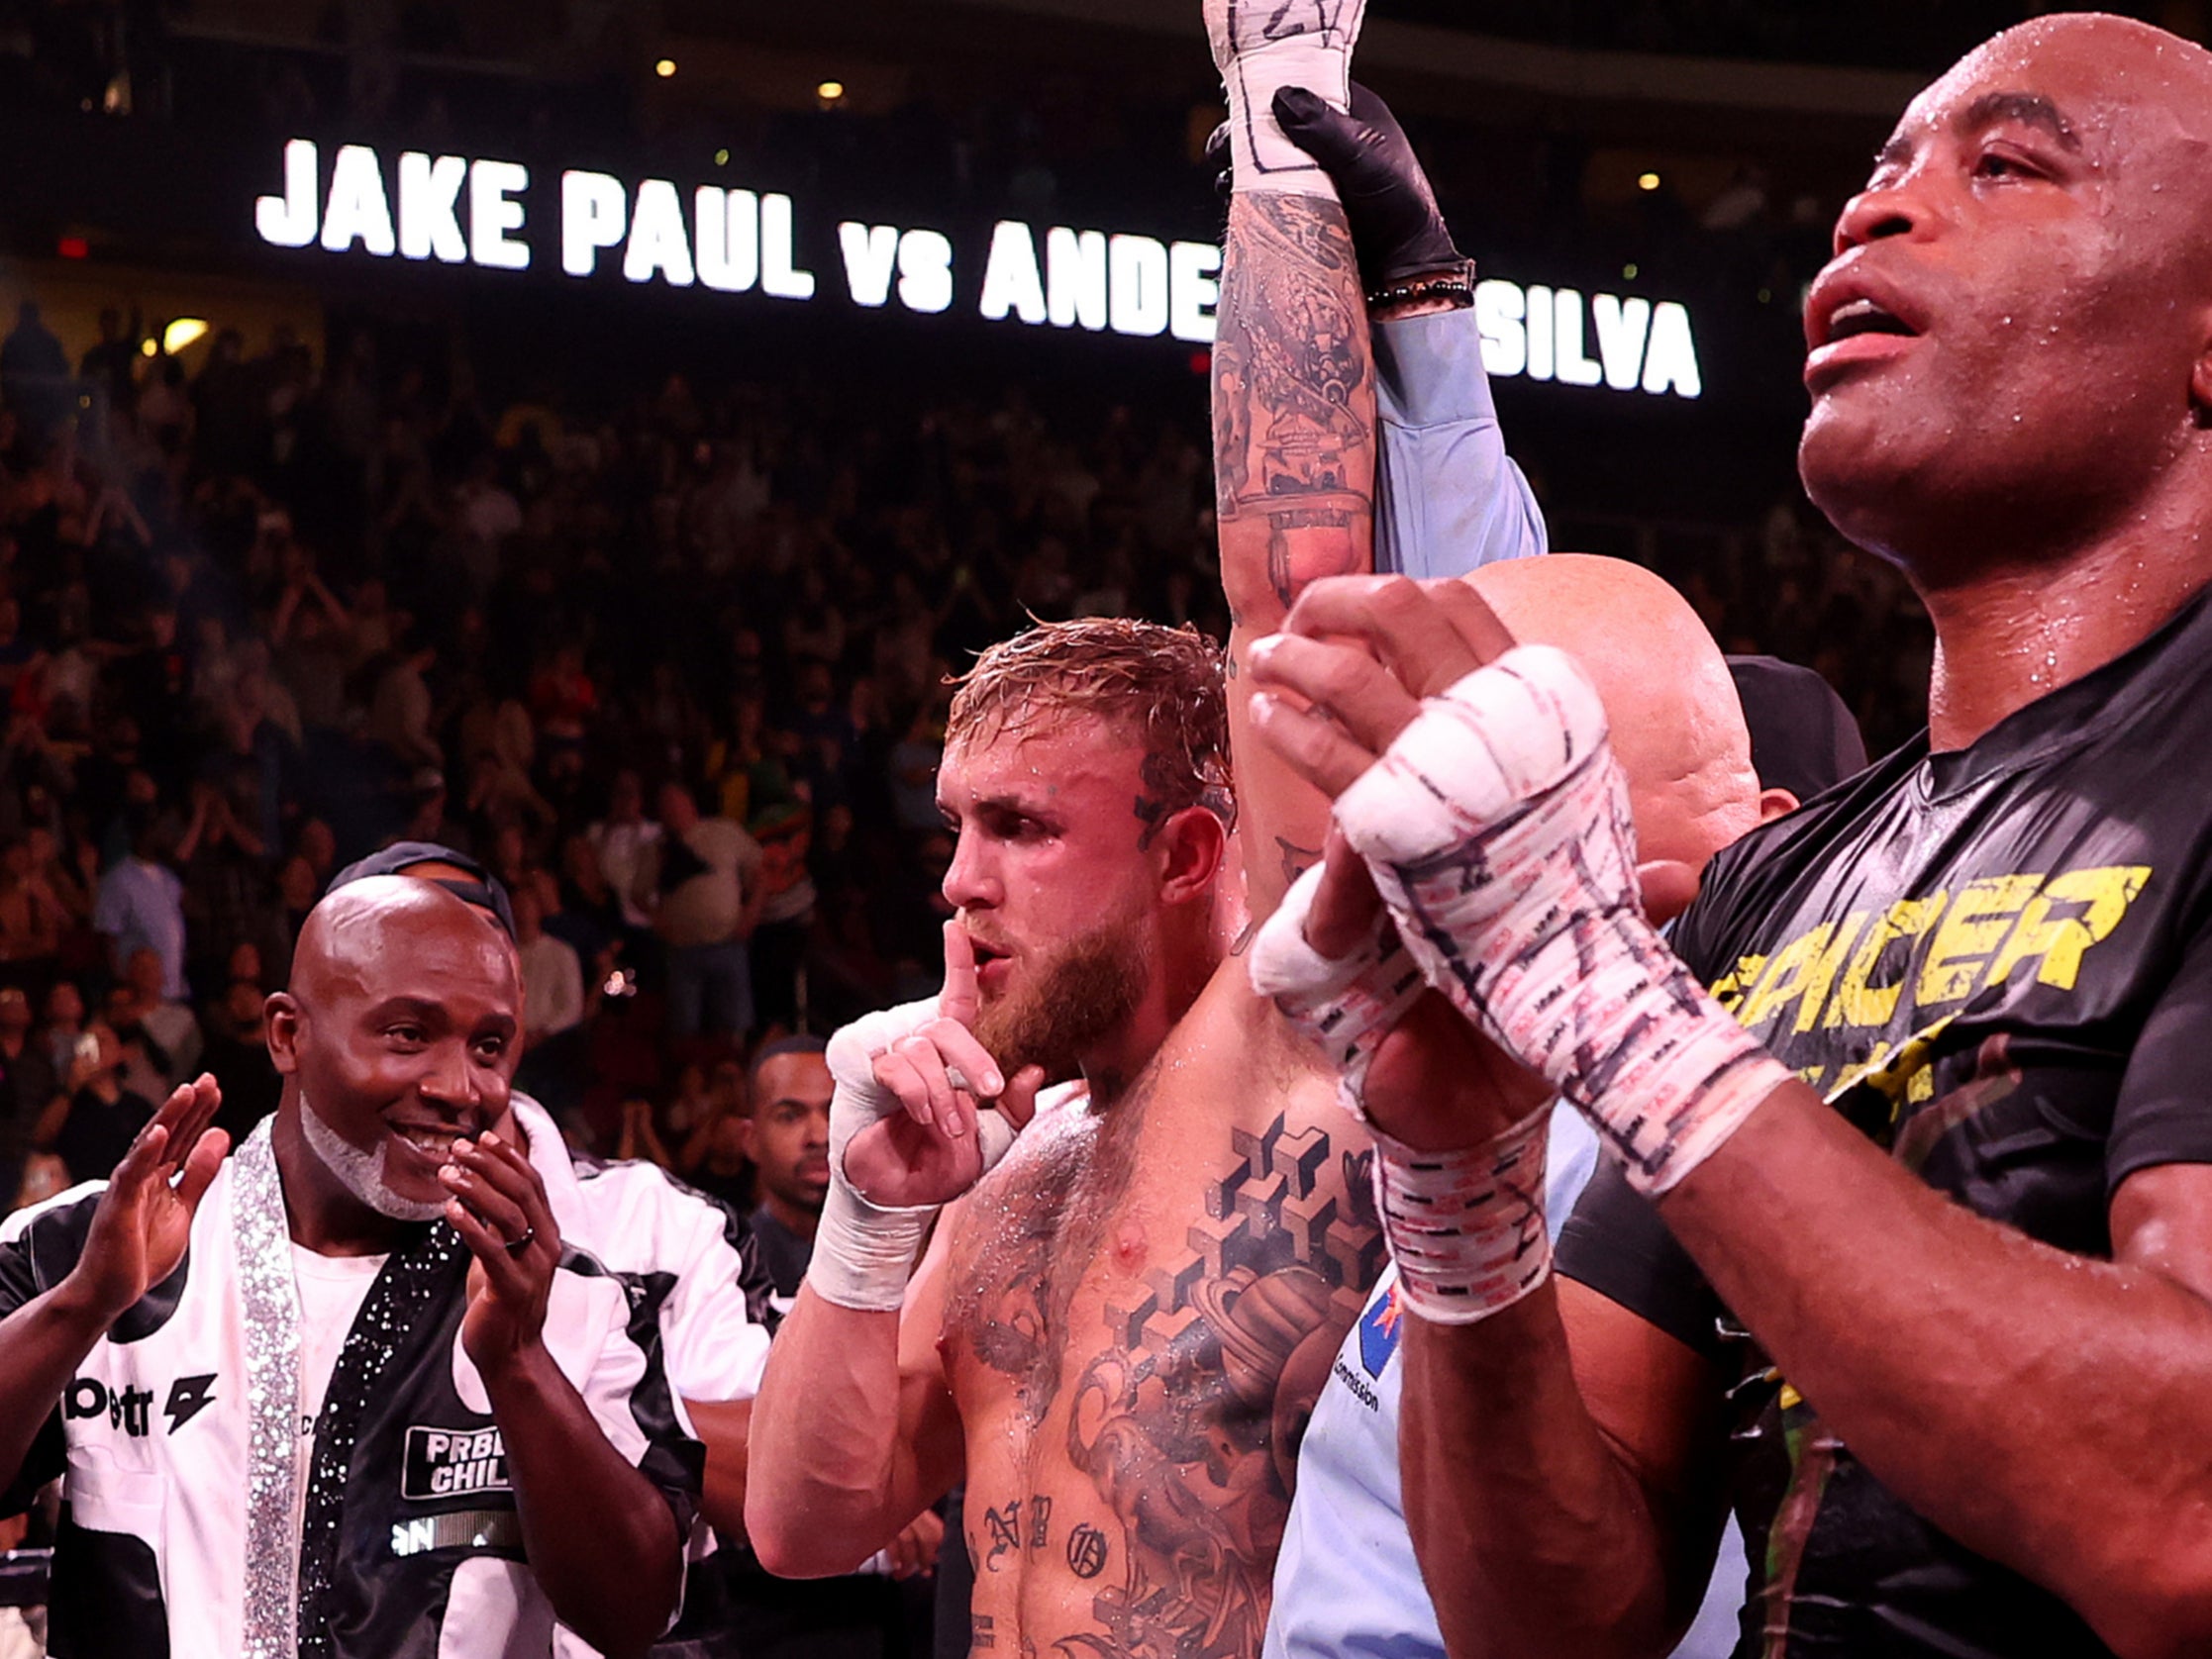 Jake Paul calls out Nate Diaz and Canelo after beating Anderson Silva The Independent